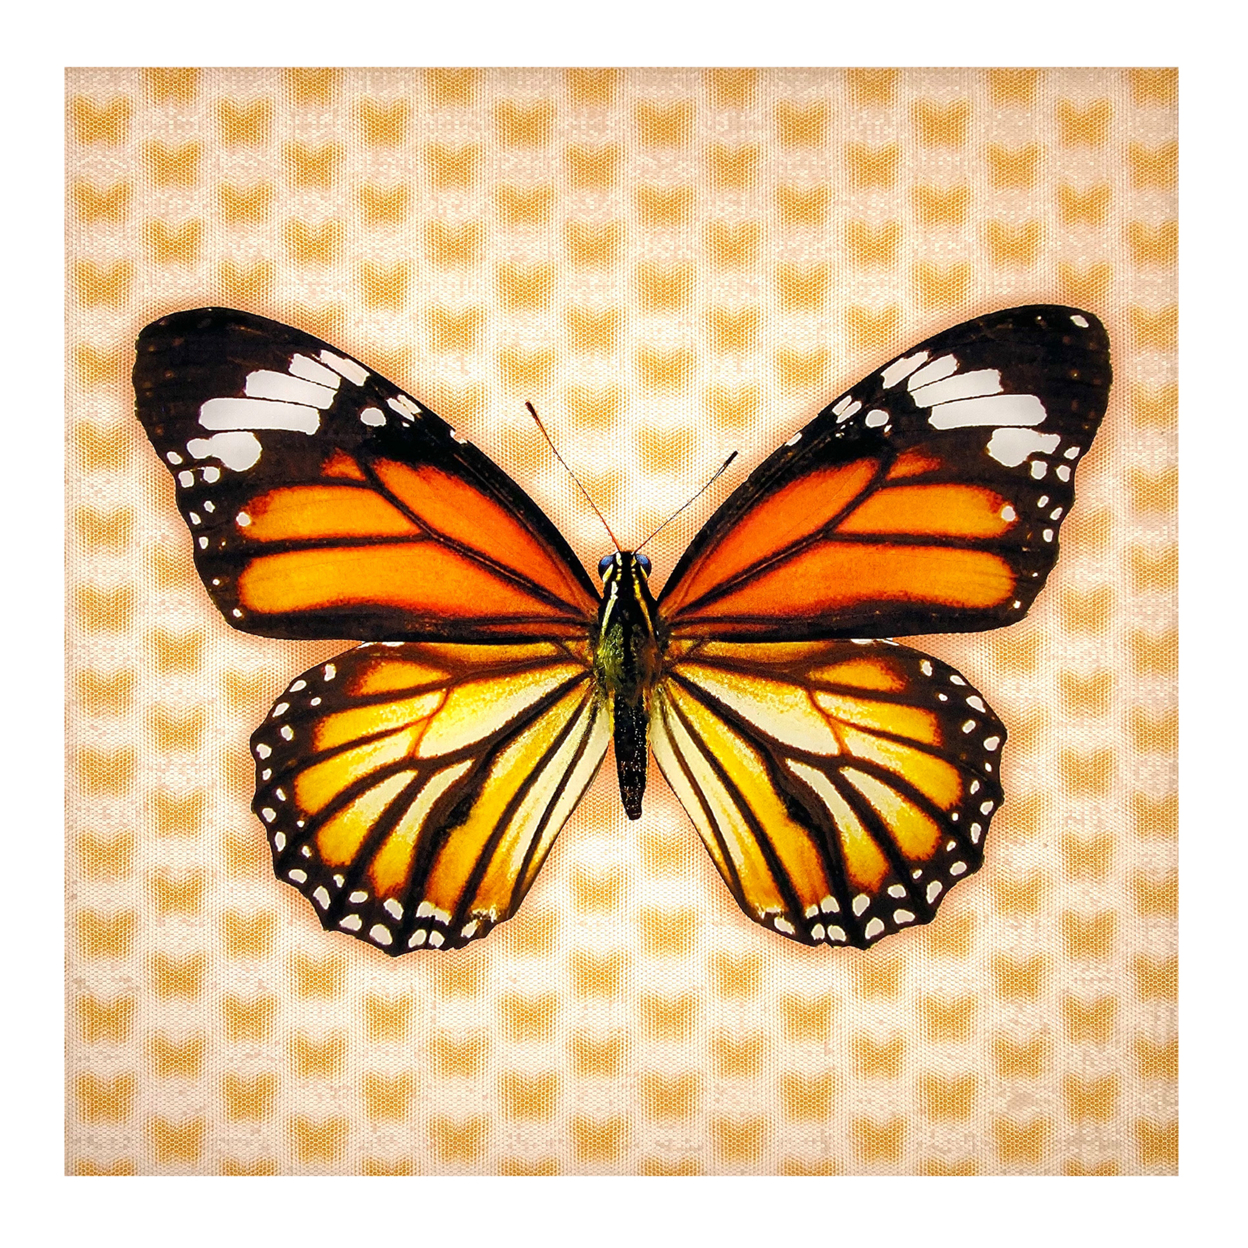 5D Multi-Dimensional Monrach Butterfly Wall Art Print On Strong Polycarbonate Panel - Lenticular Artwork By Matashi (12x12 In)